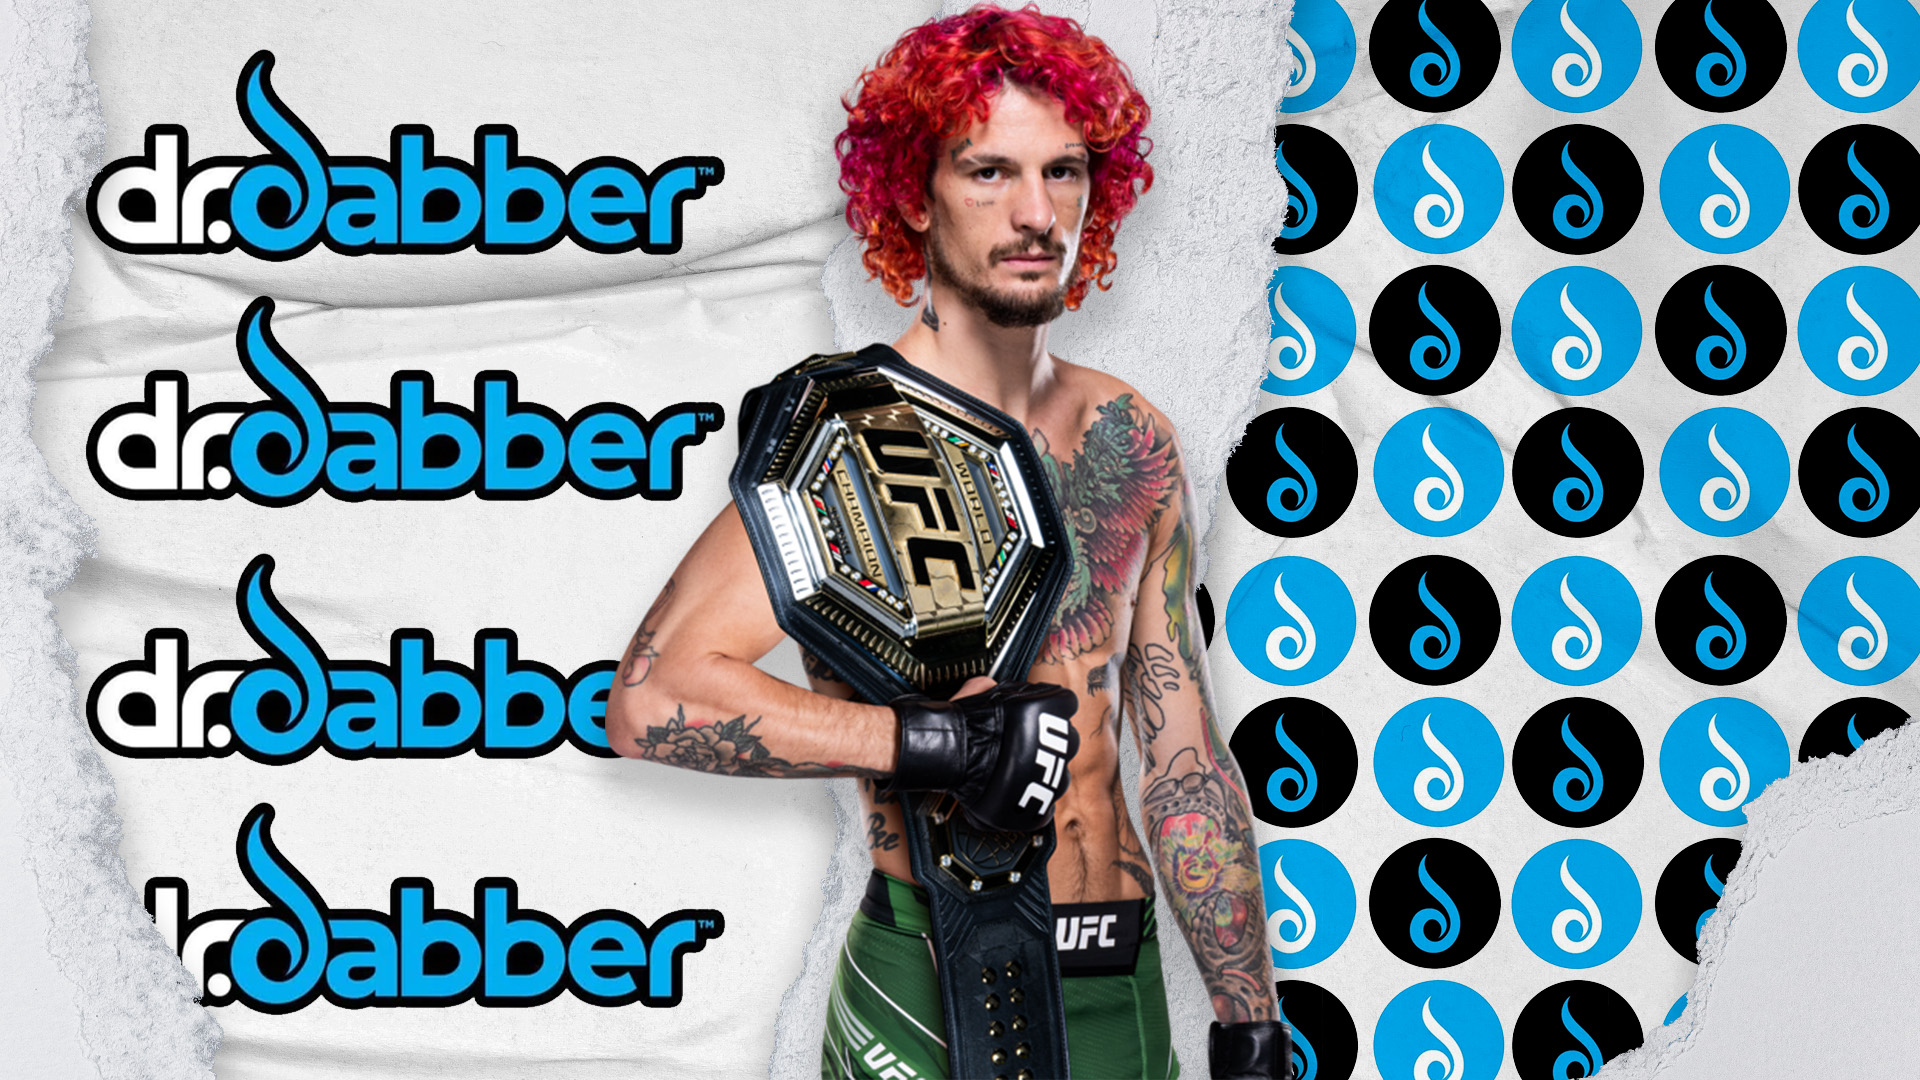 UFC Fighter Sean O’Malley Collabs With Dr. Dabber